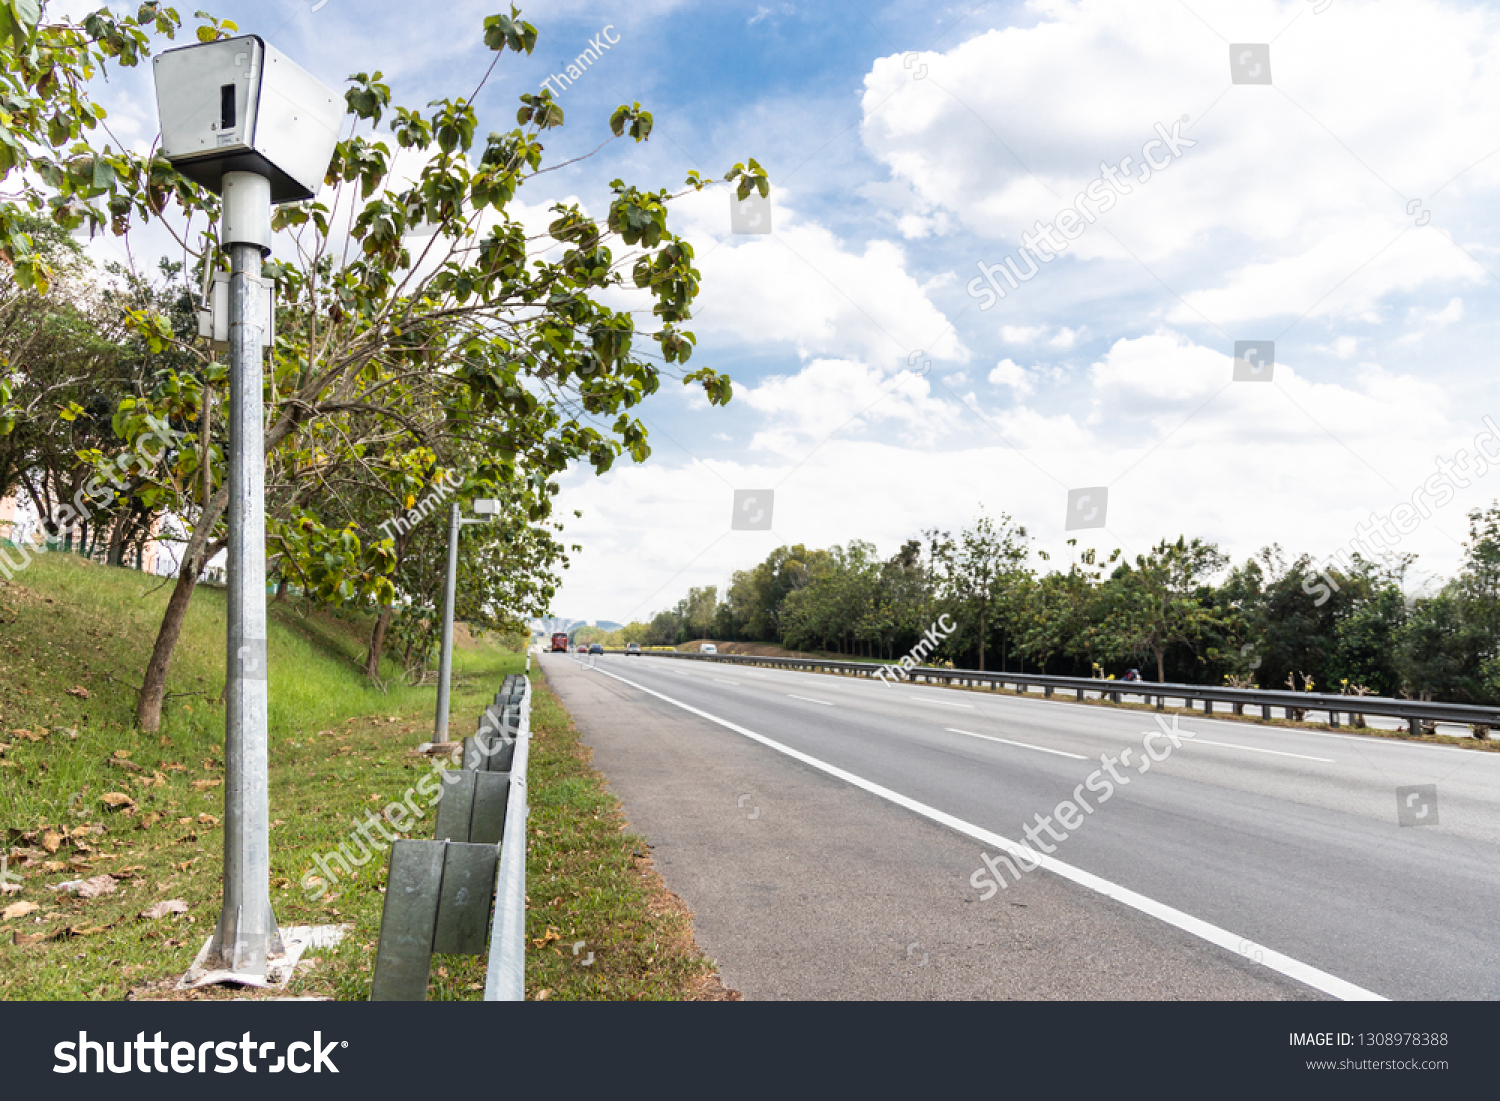 Speed trap surveillance camera along highway to control speeding to reduce speeding related accident #1308978388